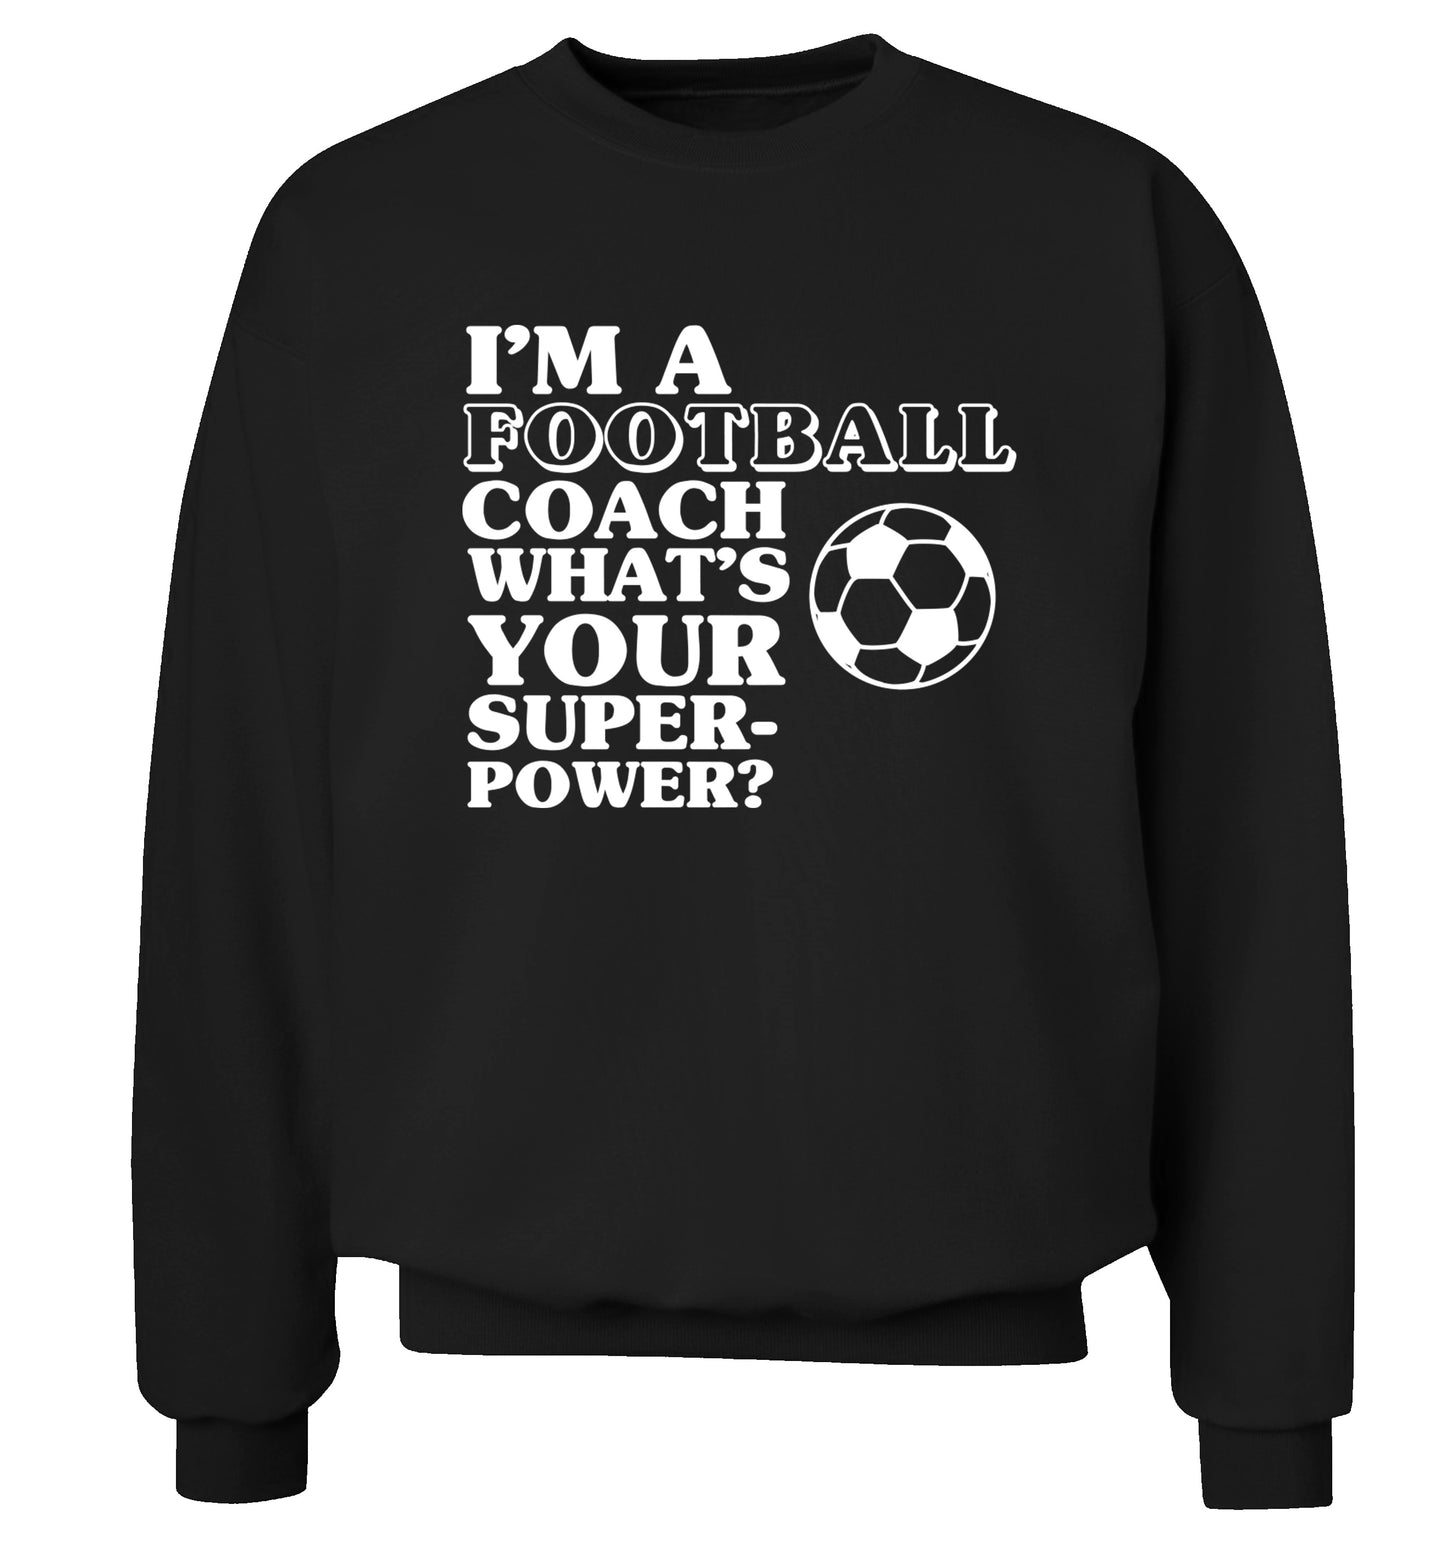 I'm a football coach what's your superpower? Adult's unisexblack Sweater 2XL